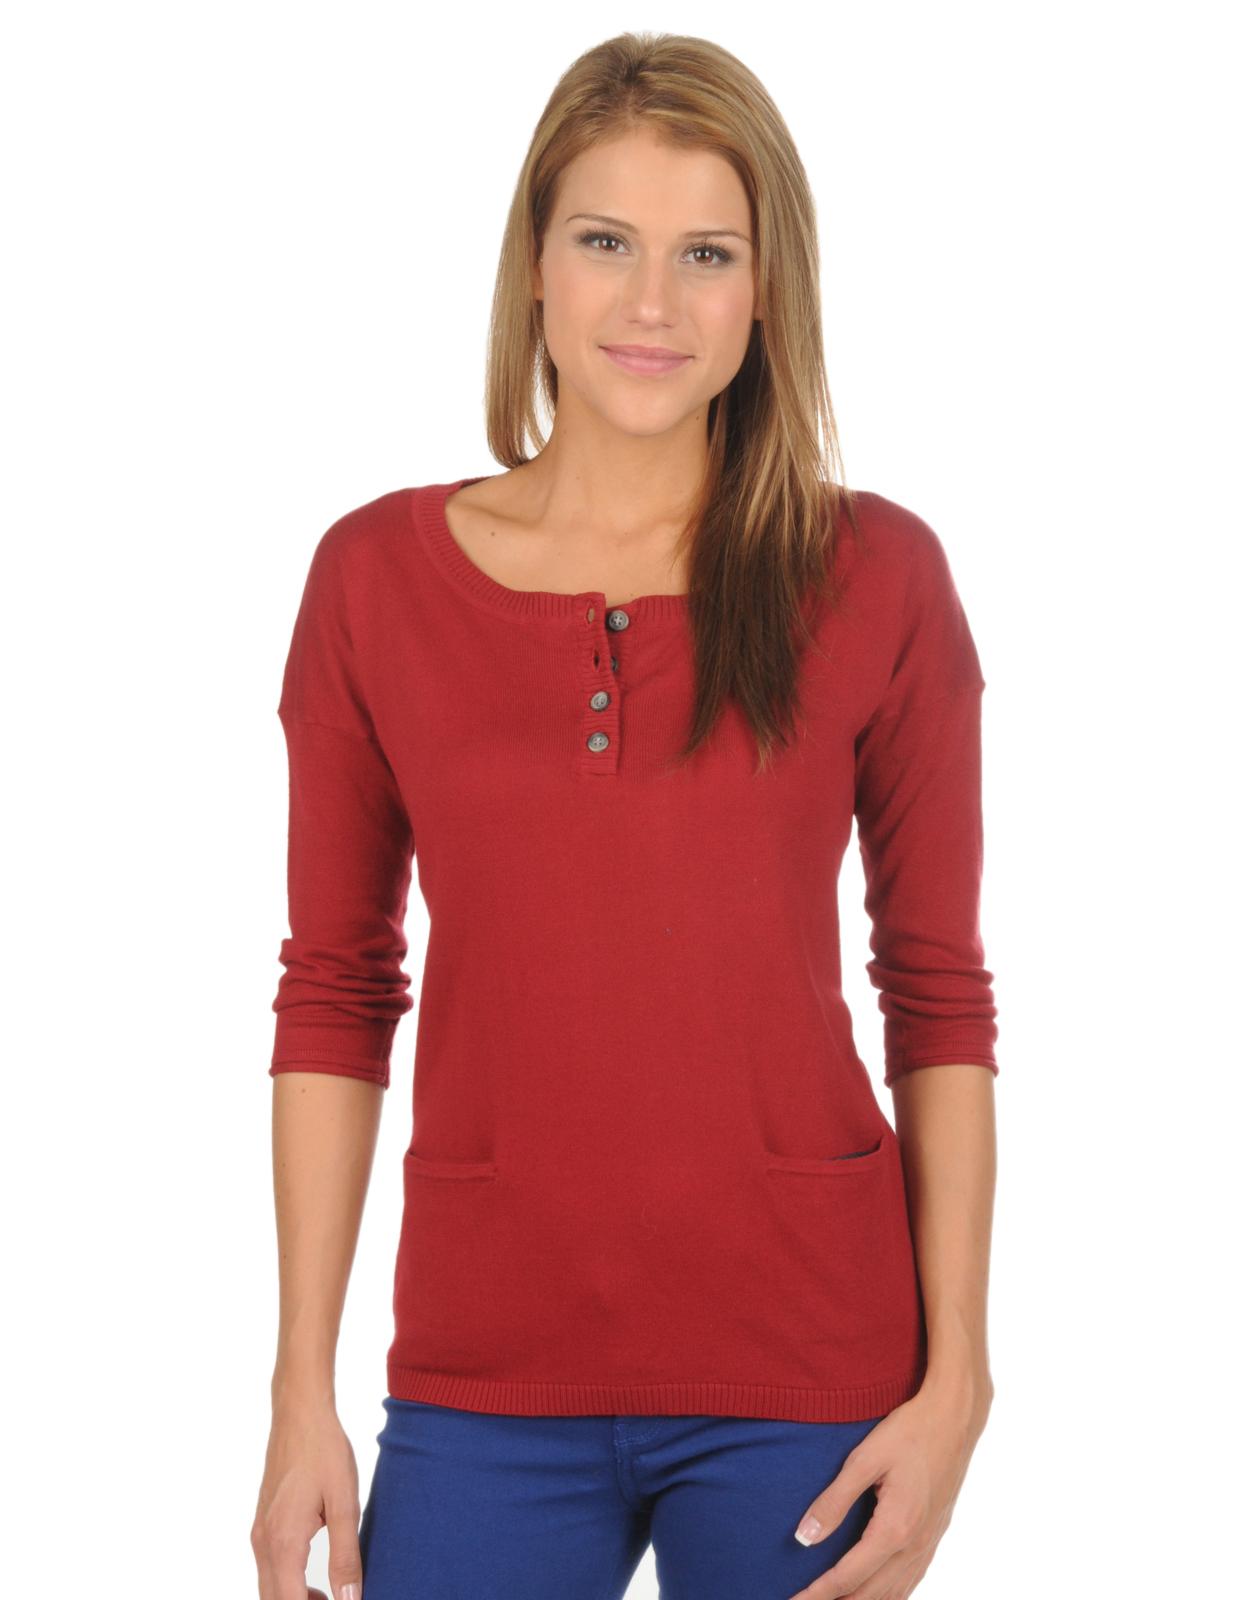 Foto Only Young Organic Button Jersey rojo ruibarbo L foto 80699